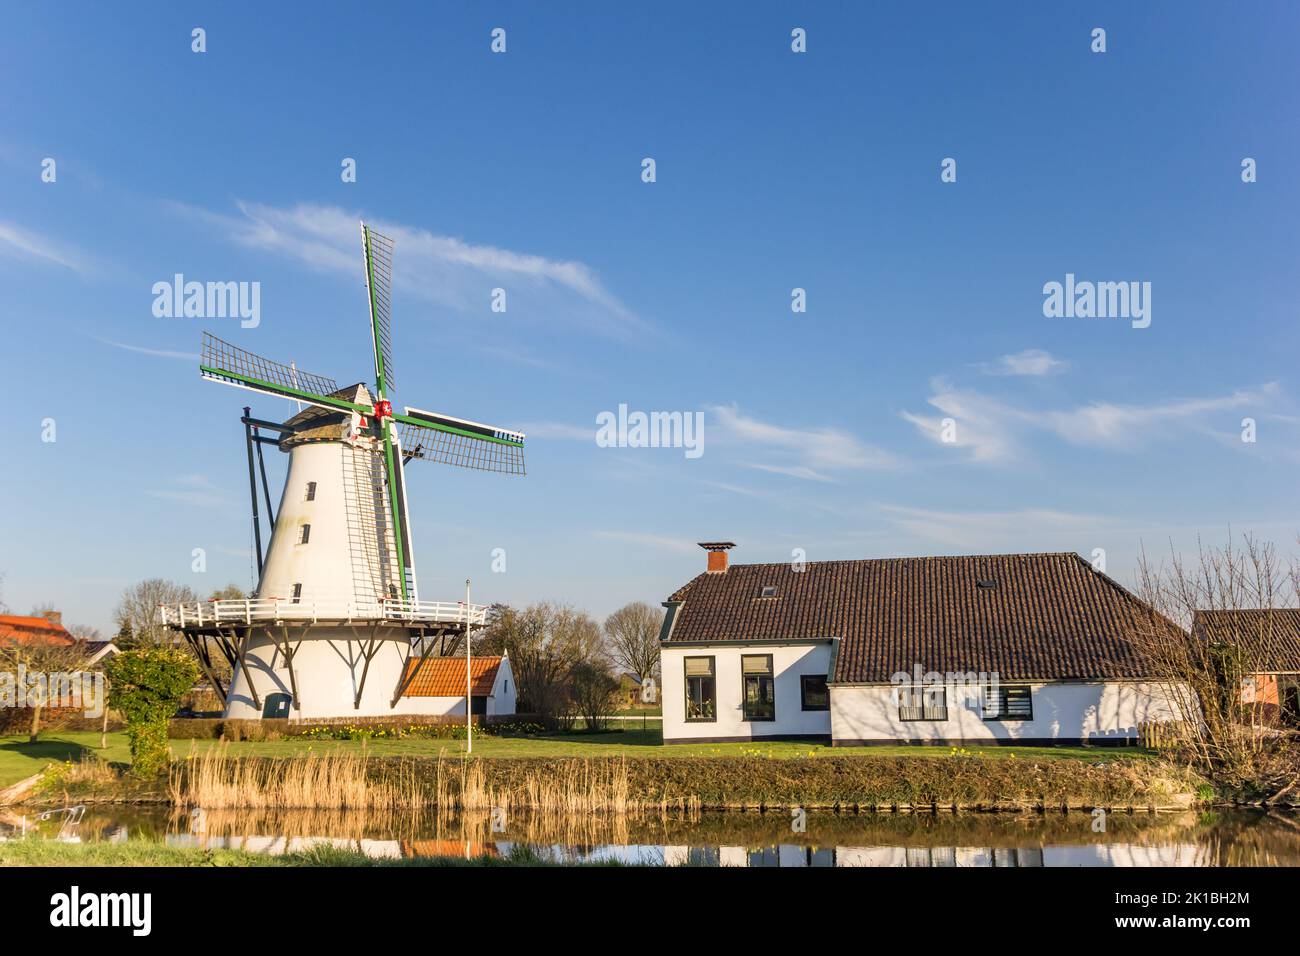 Historic windmill at the Damsterdiep river in Ten Boer, Netherlands Stock Photo